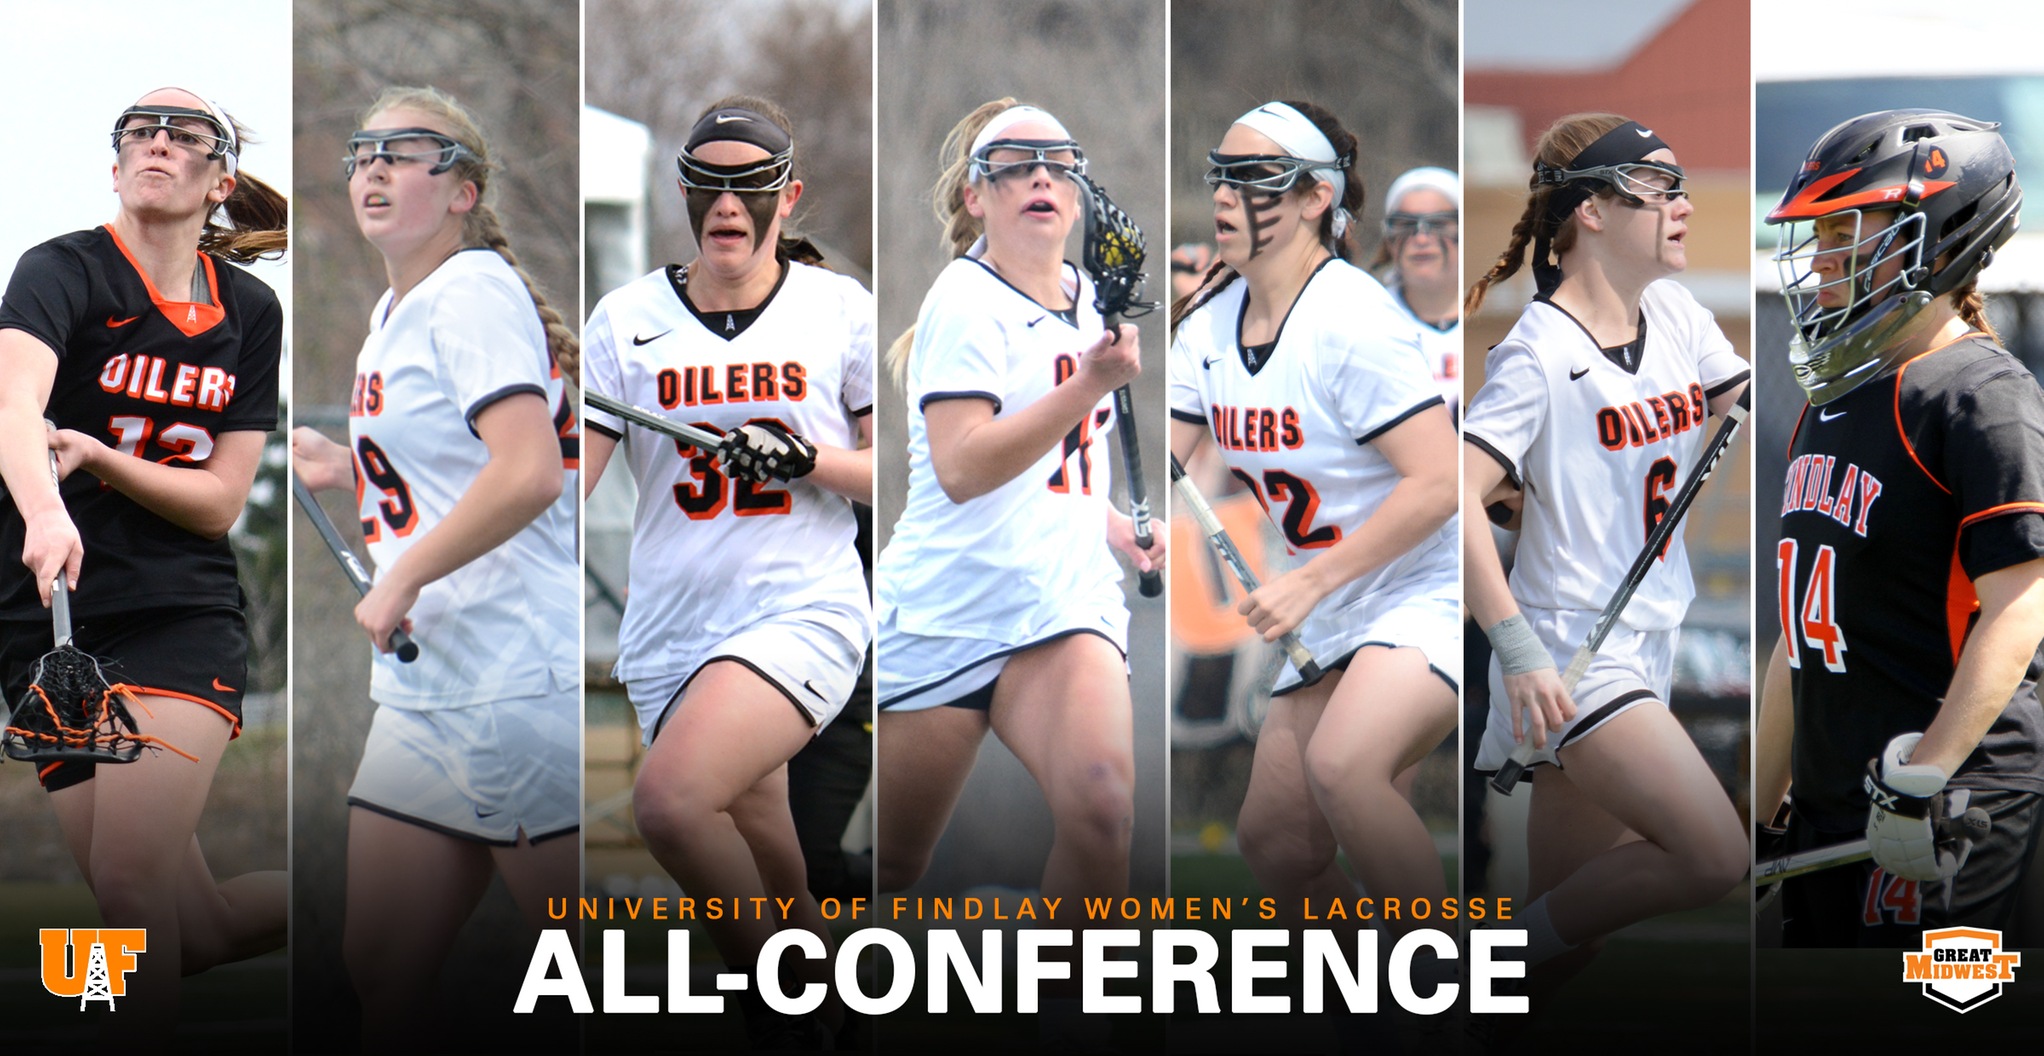 7 Oilers Earn All-Conference Honors